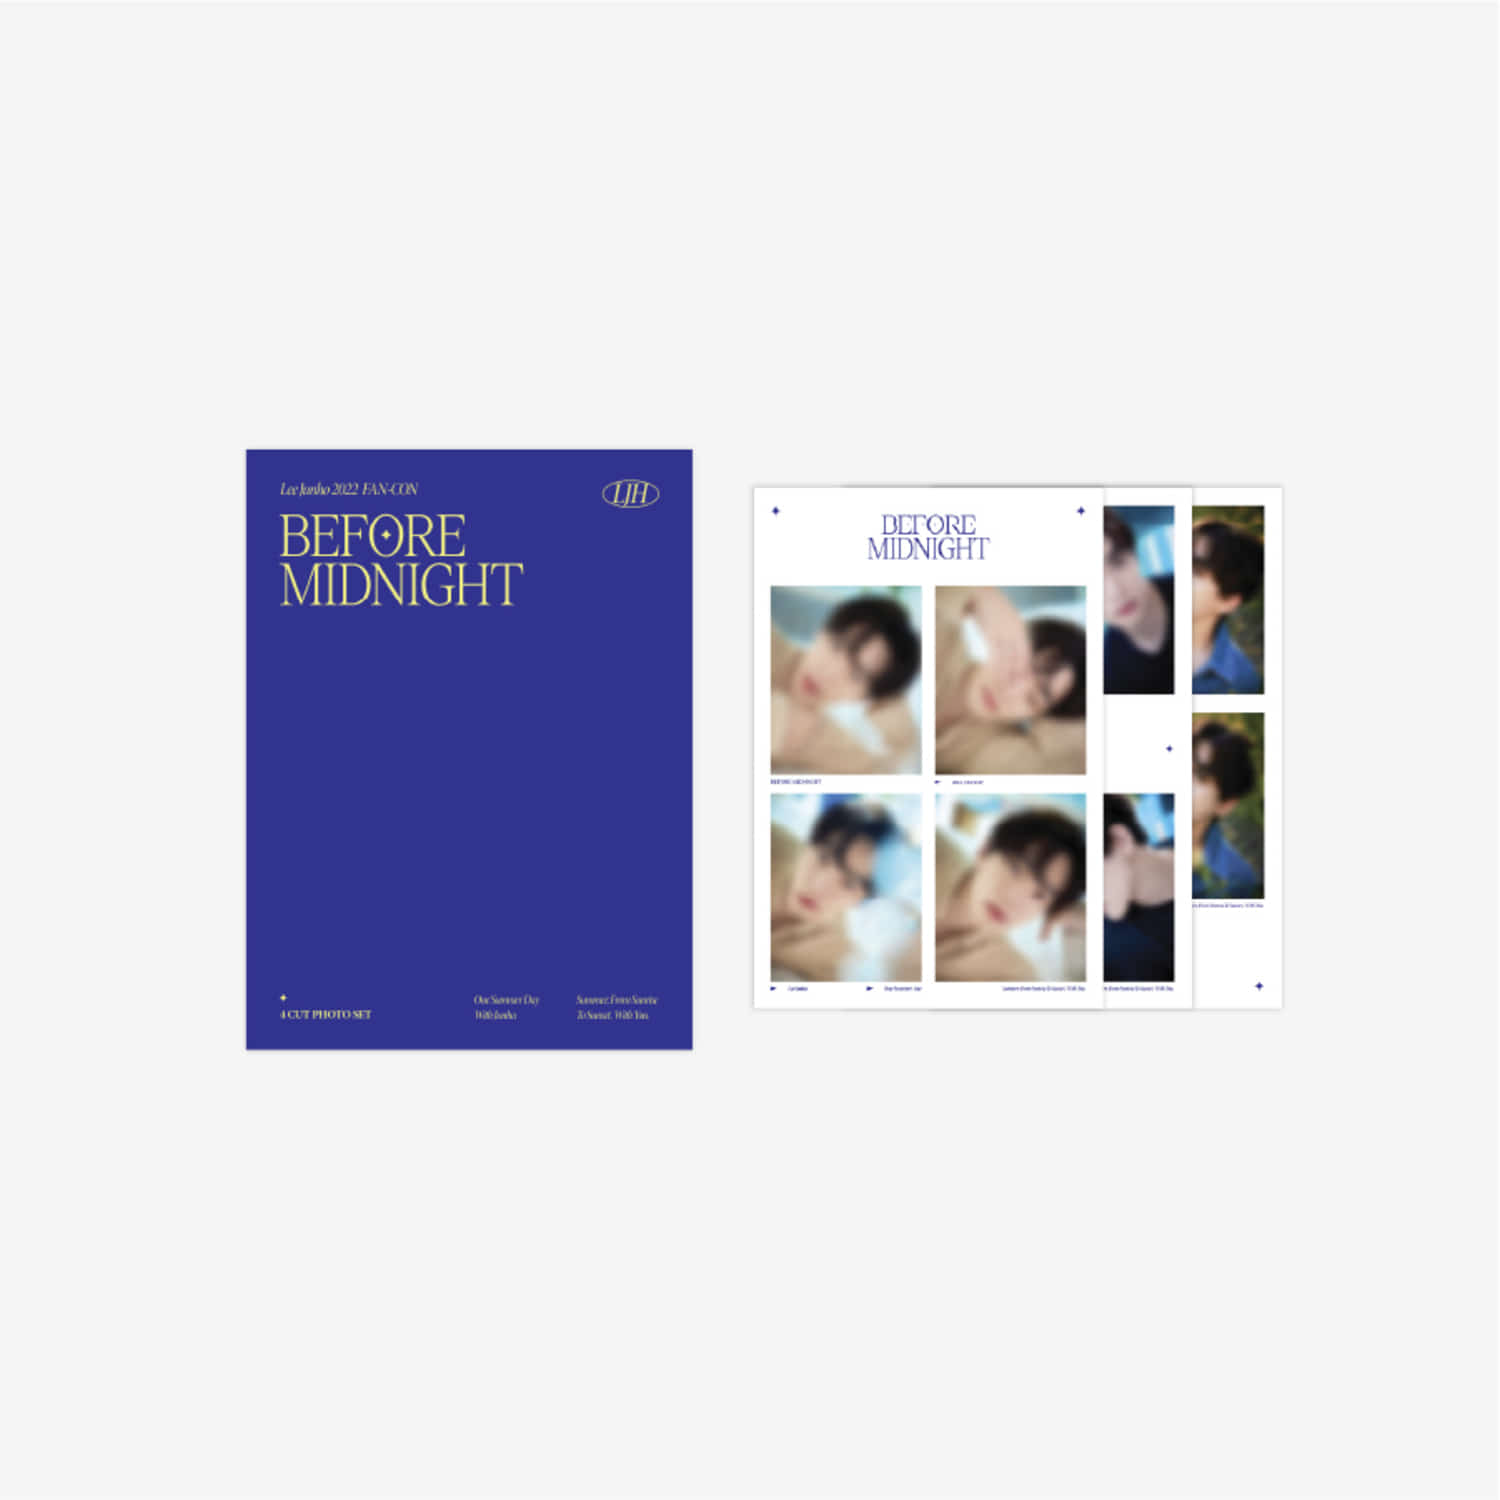 2PM 이준호(LEE JUNHO) [BEFORE MIDNIGHT] OFFICIAL MD - 네컷 포토 세트 4 CUT PHOTO SET